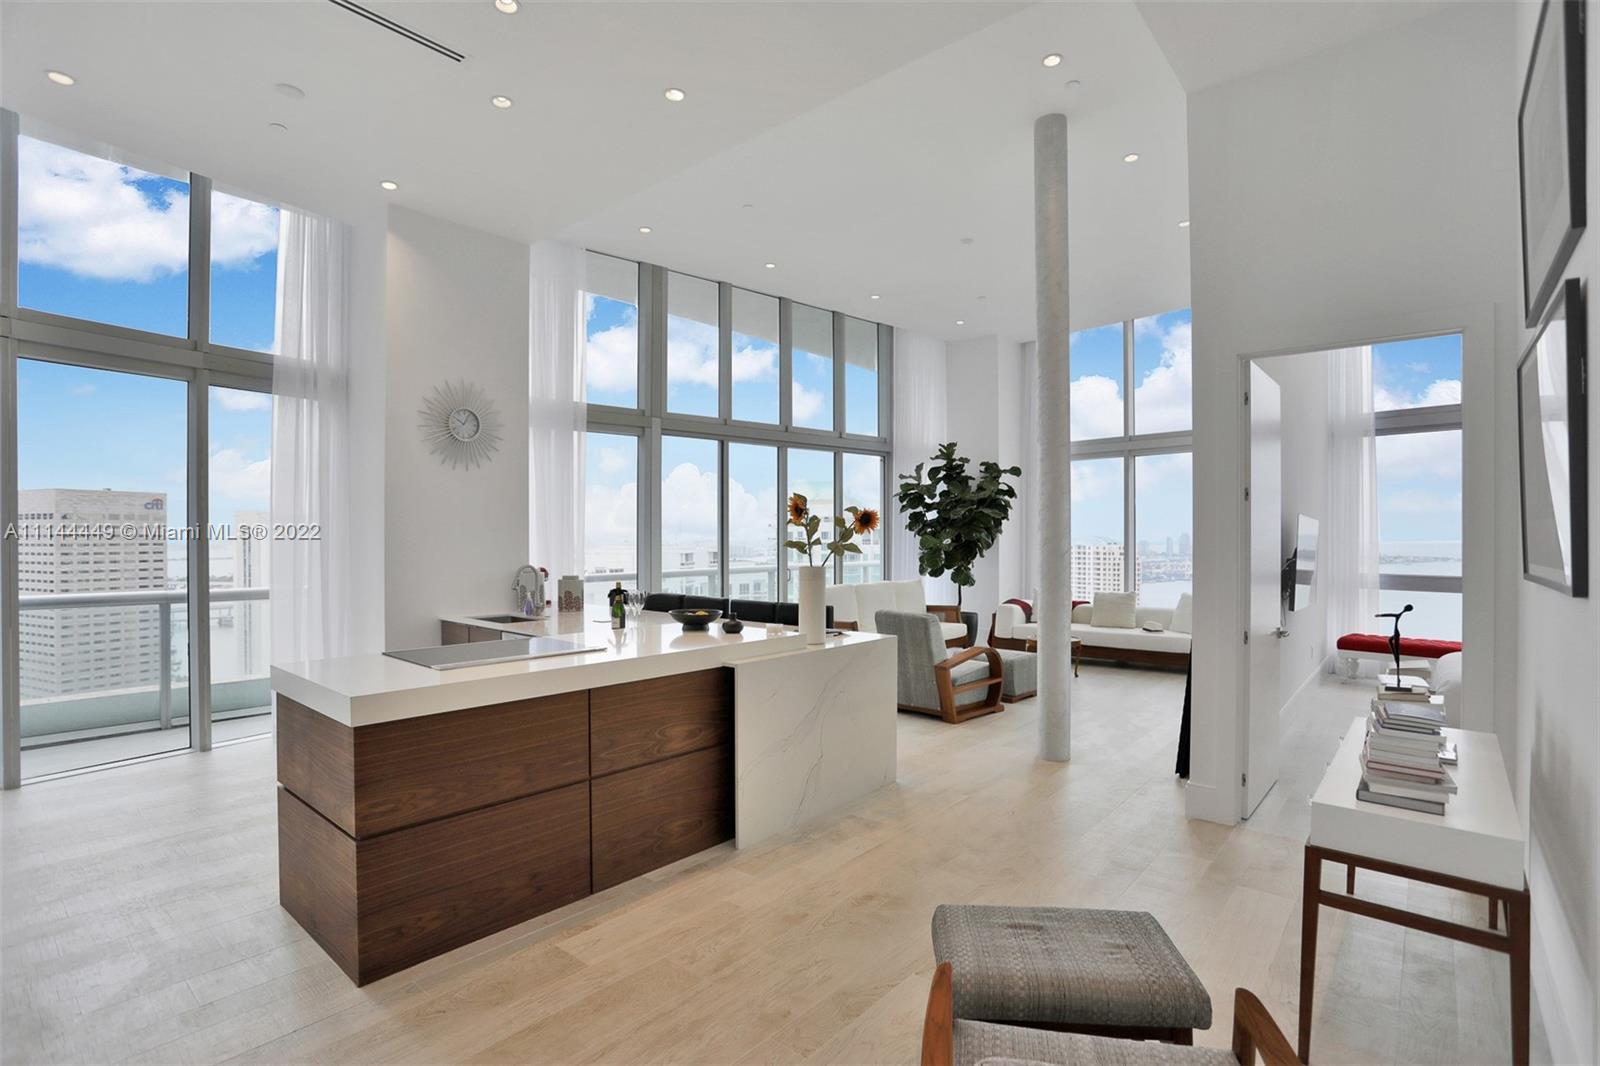 Icon Brickell's Contemporary Masterpiece Renovated to Perfection!!! Over $700K spent in upgrades, re